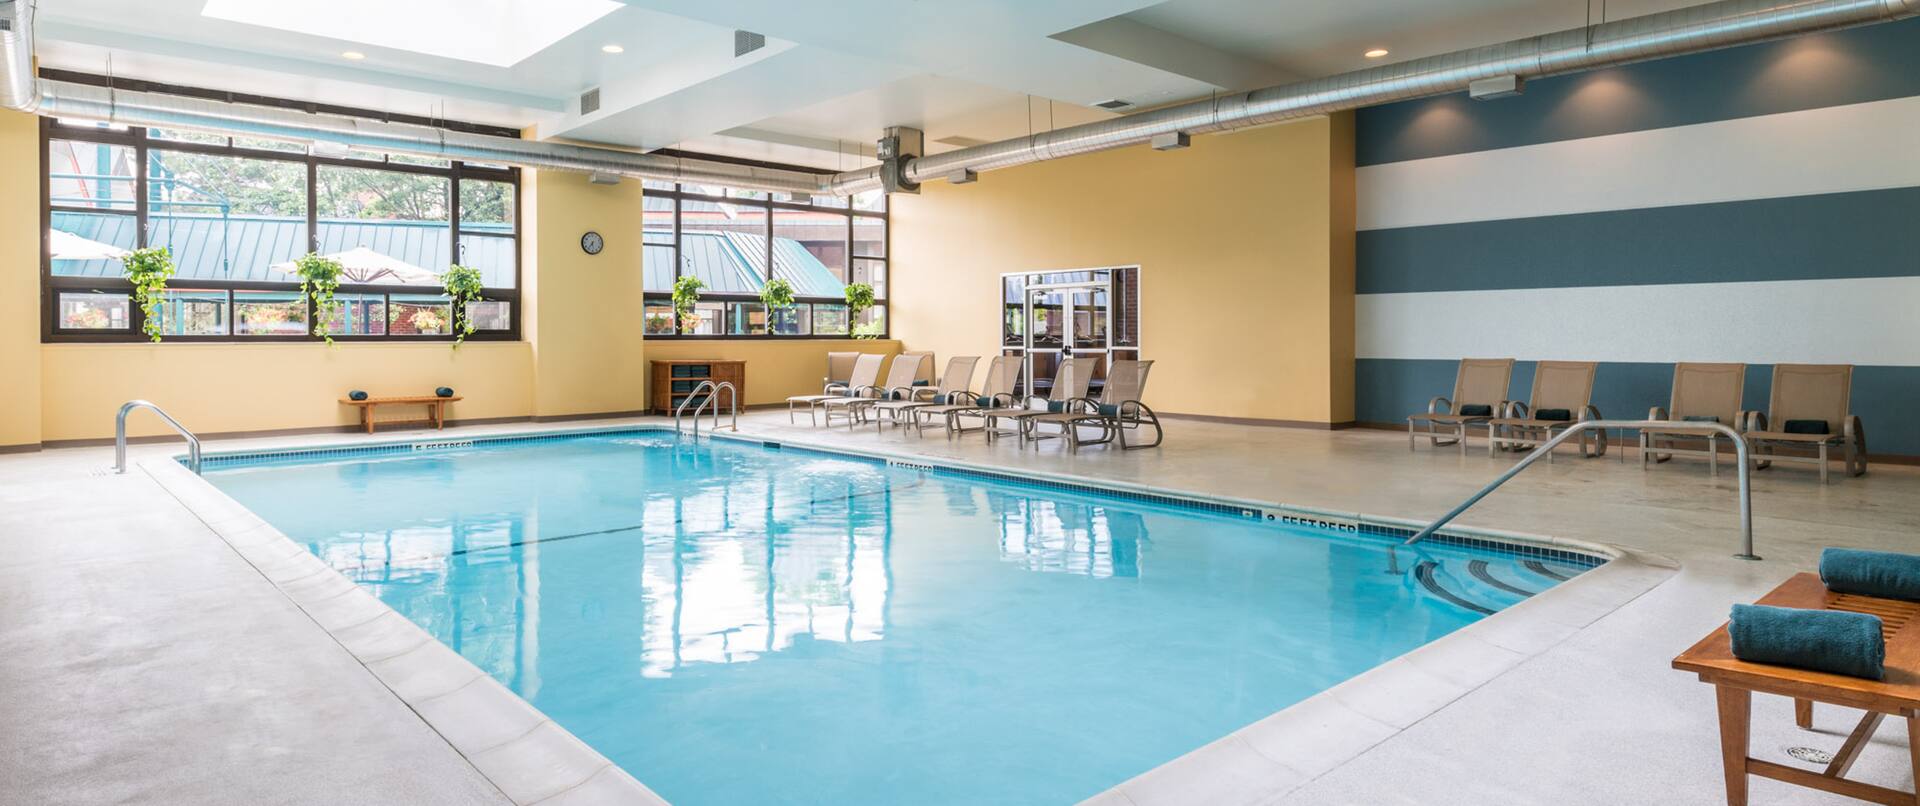 Indoor pool with loungers and handrail